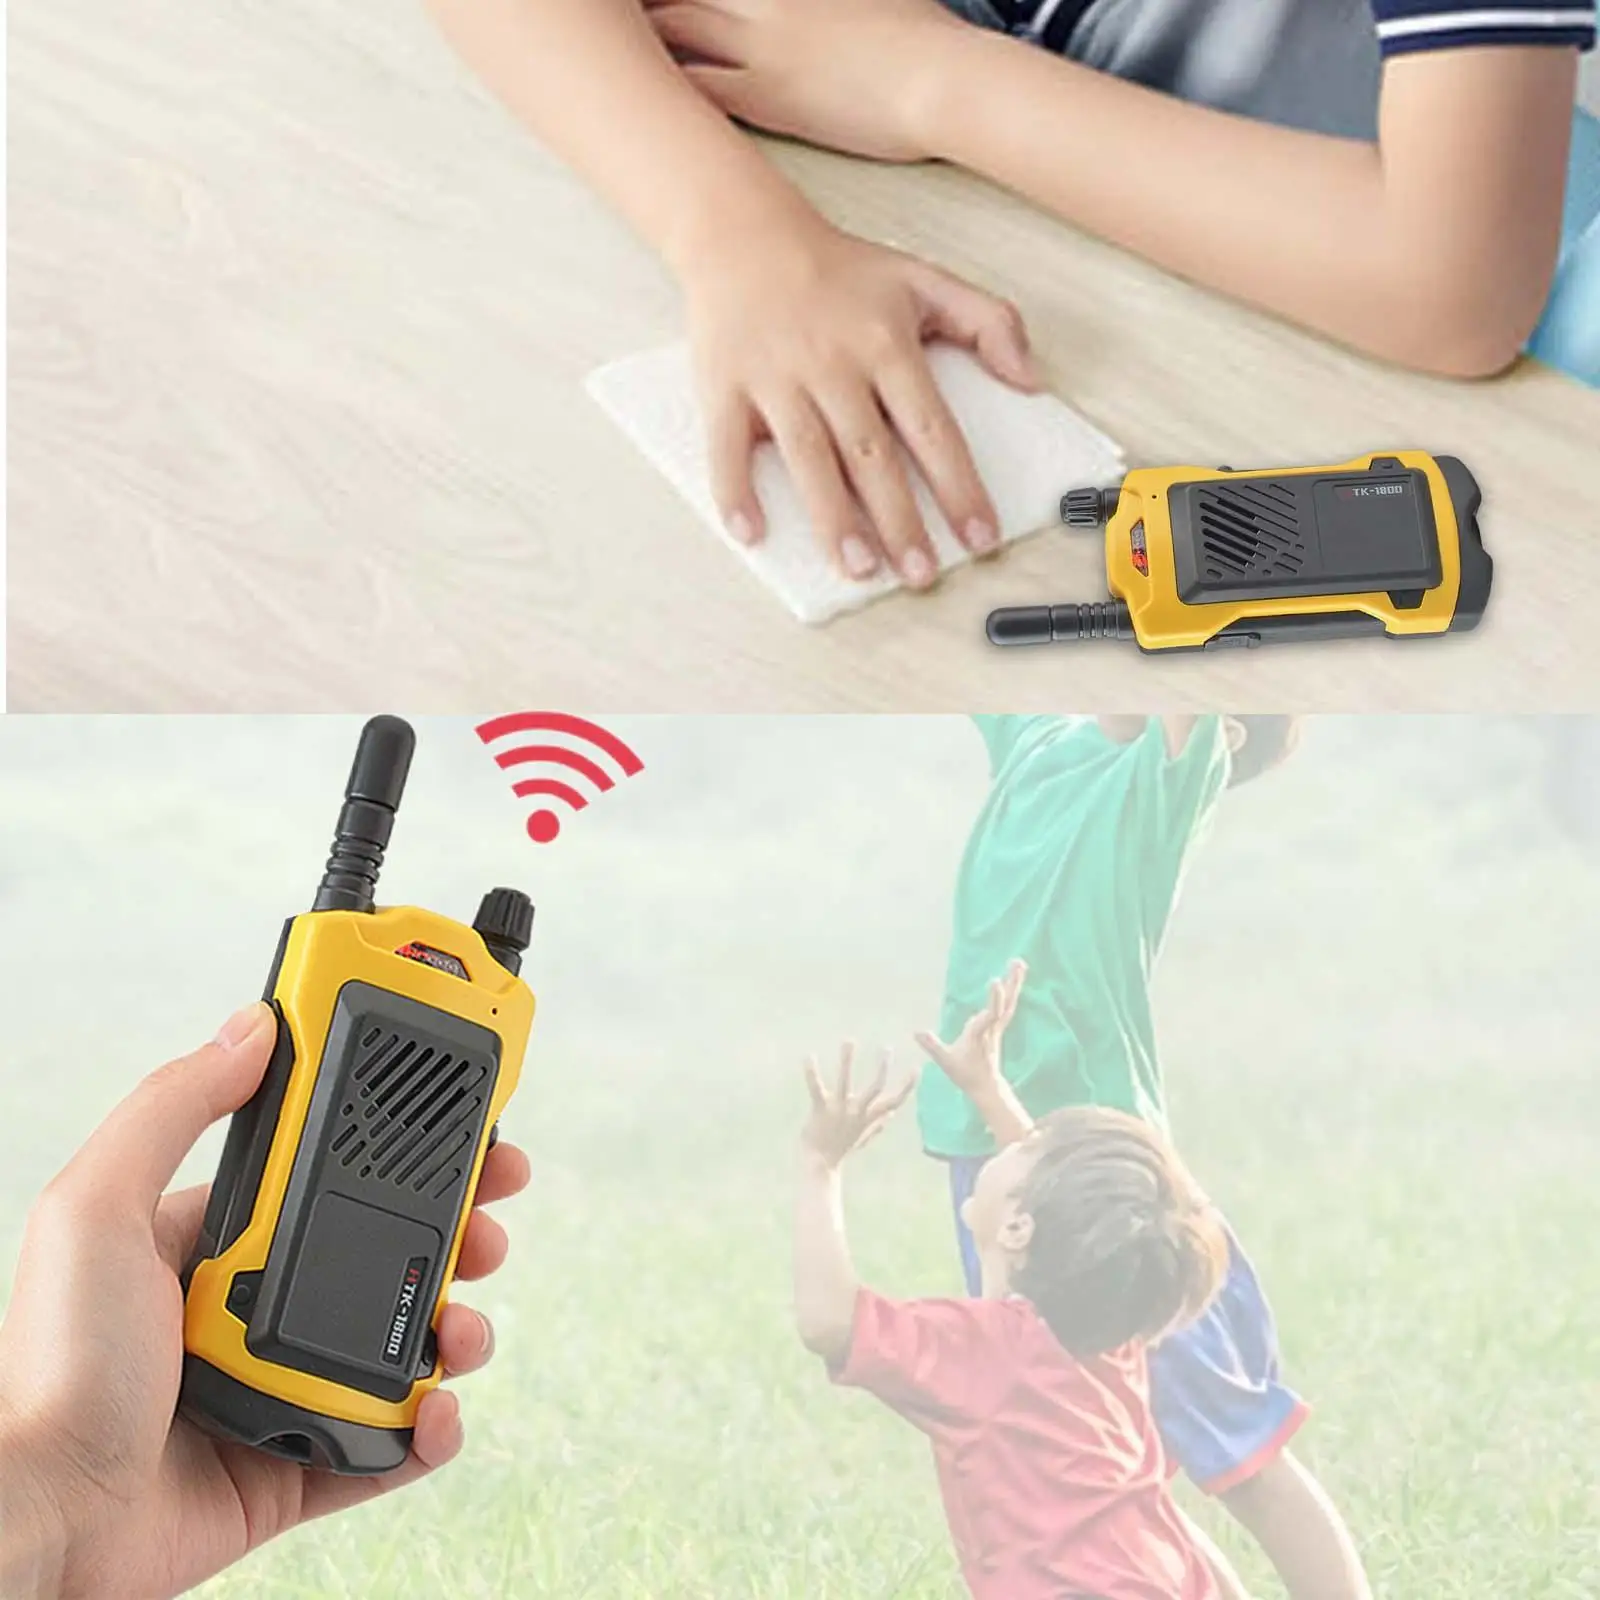 Handheld 2 Pieces Christmas Gifts Electronic Gadgets 200M Long Range Kids Talkies Talkies for Children